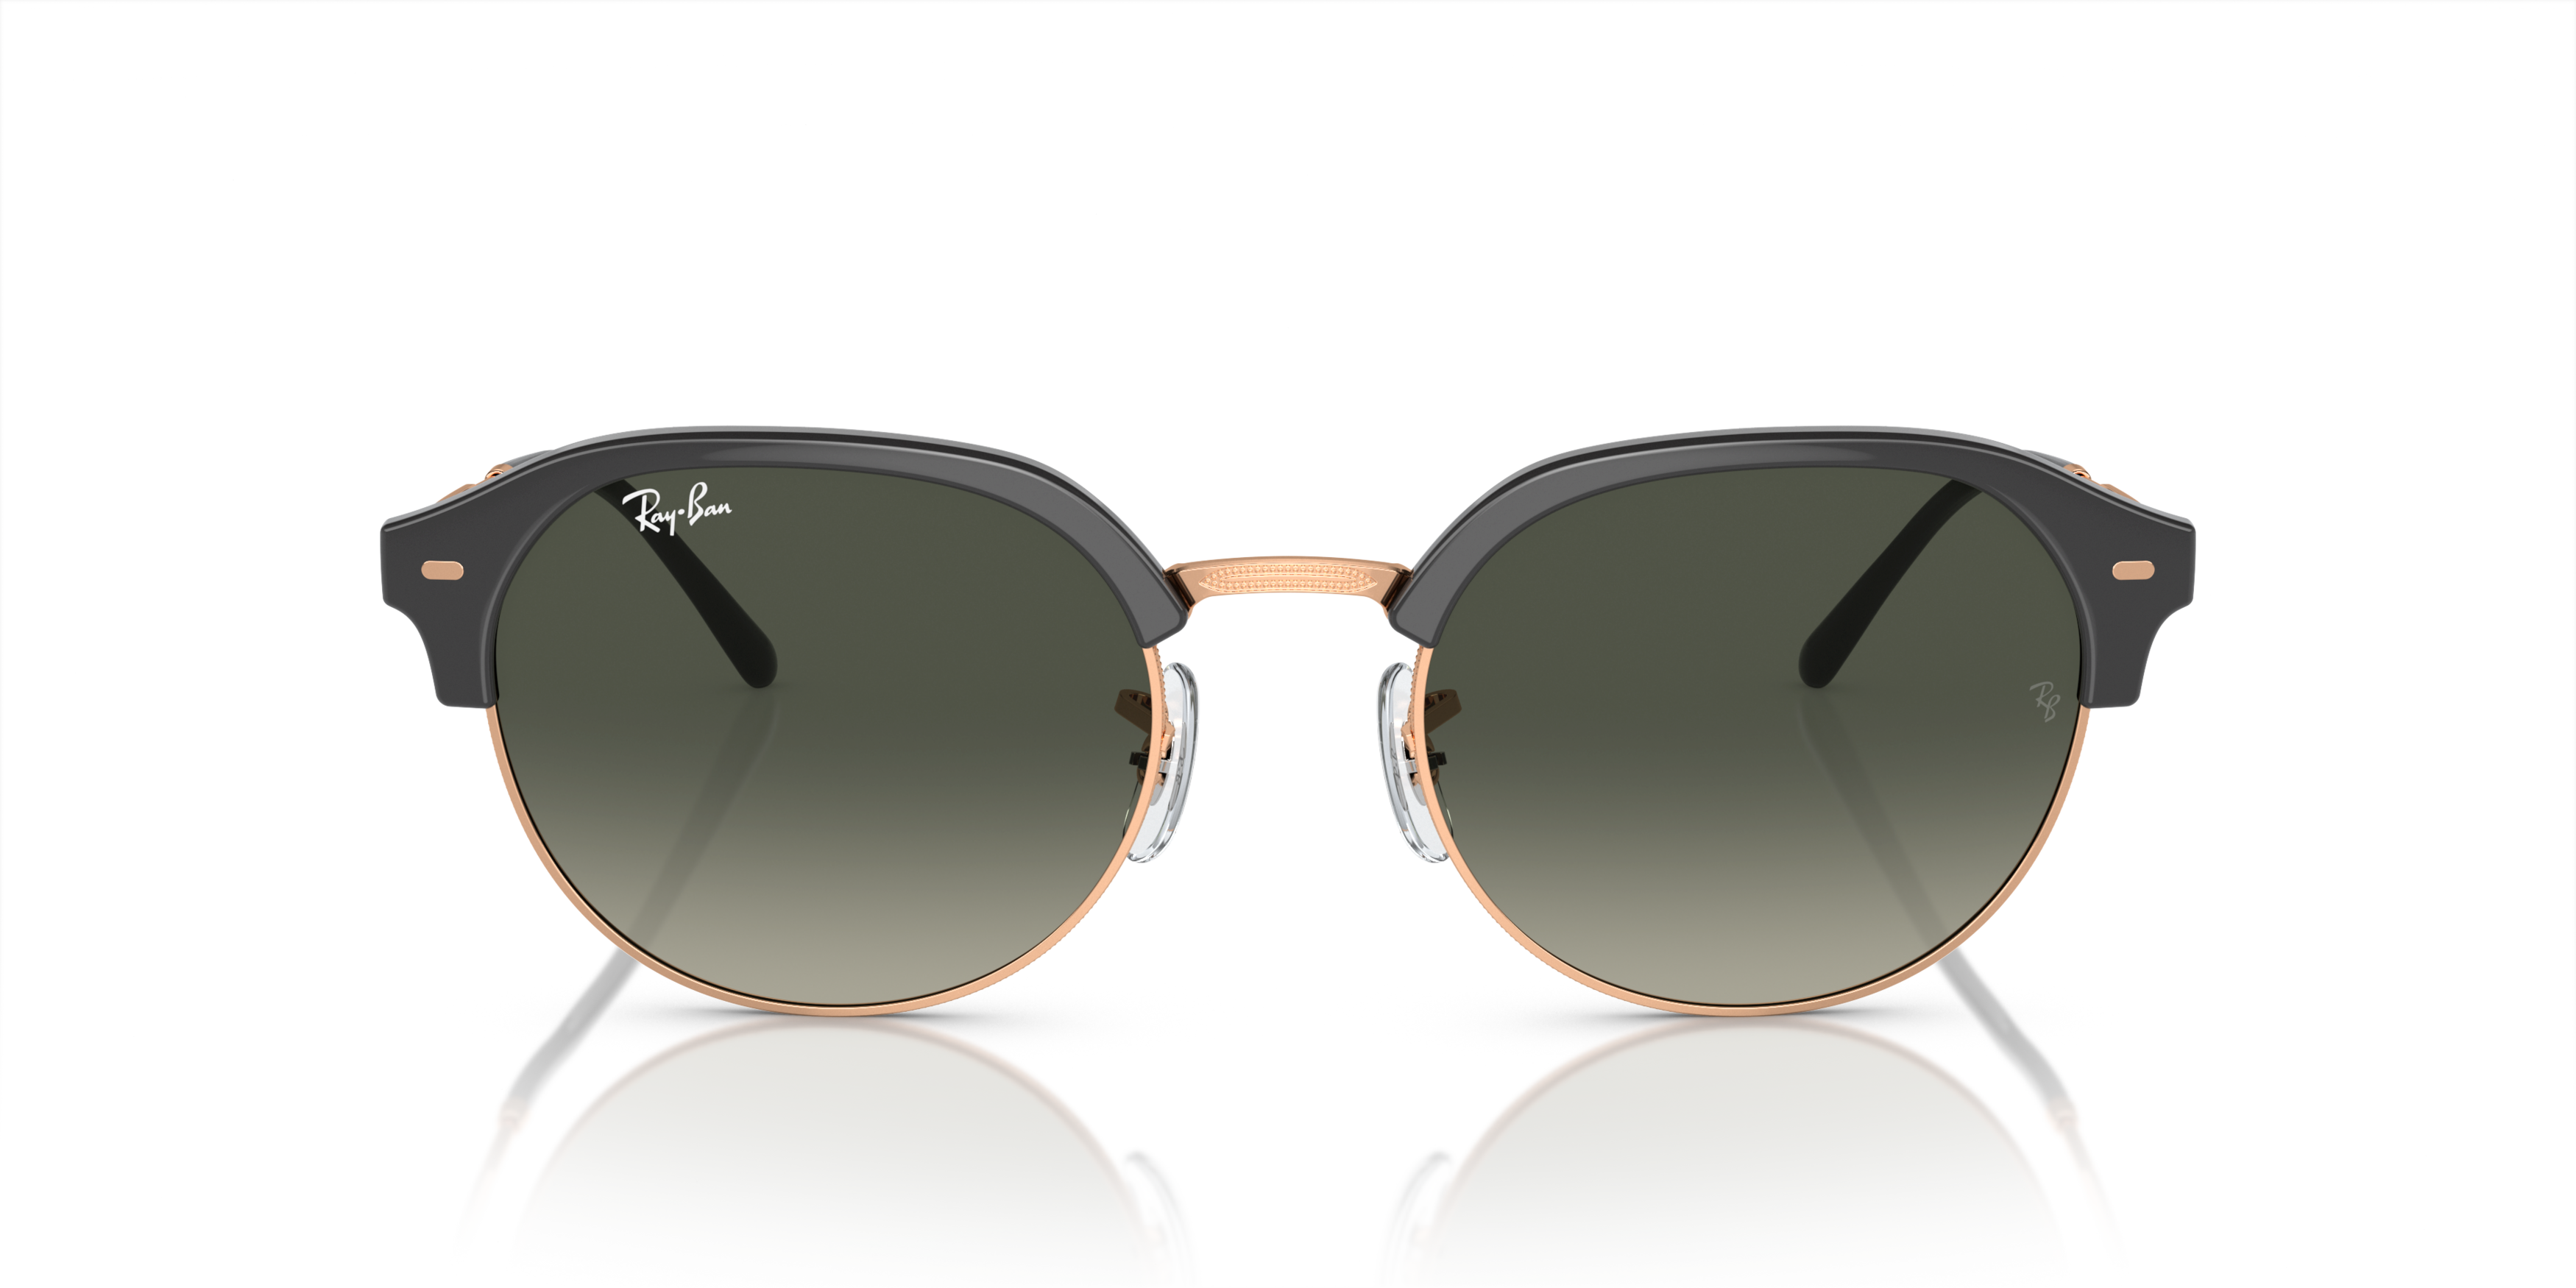 [products.image.front] Ray-Ban 0RB4429 672071 Solbriller